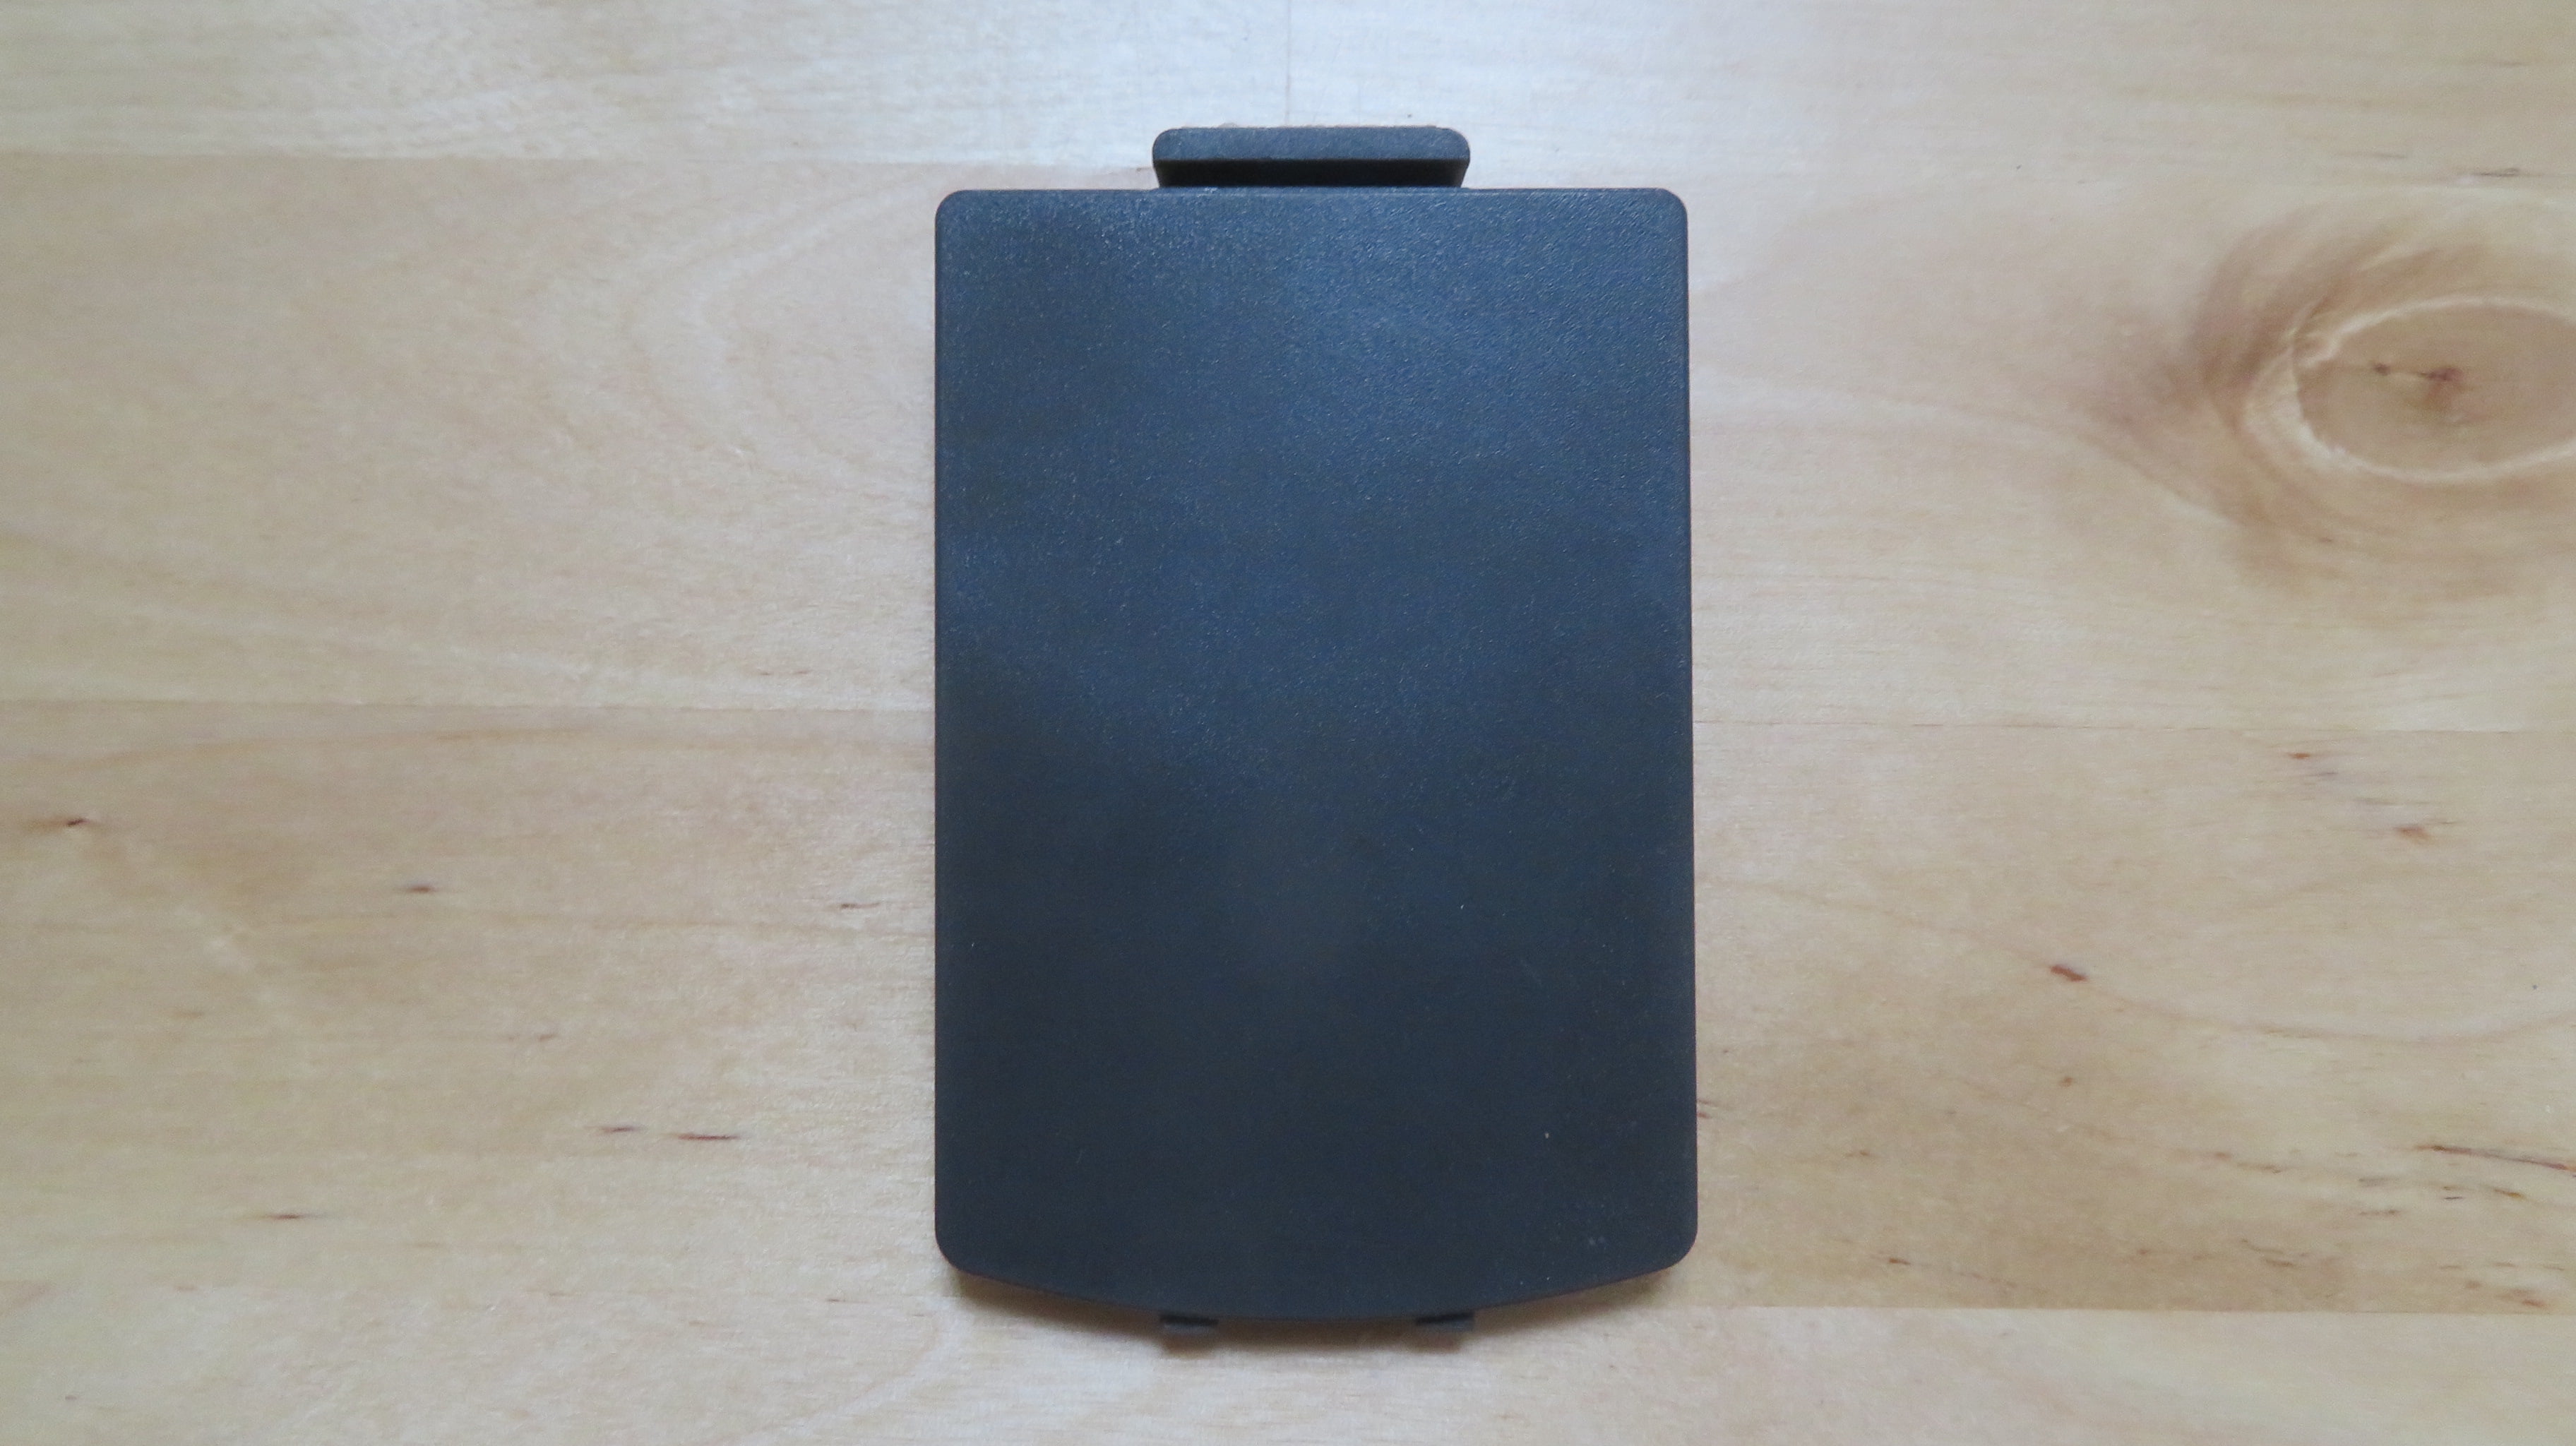 TI-83 Plus Graphing Calculator Replacement Part Battery Cover Door 